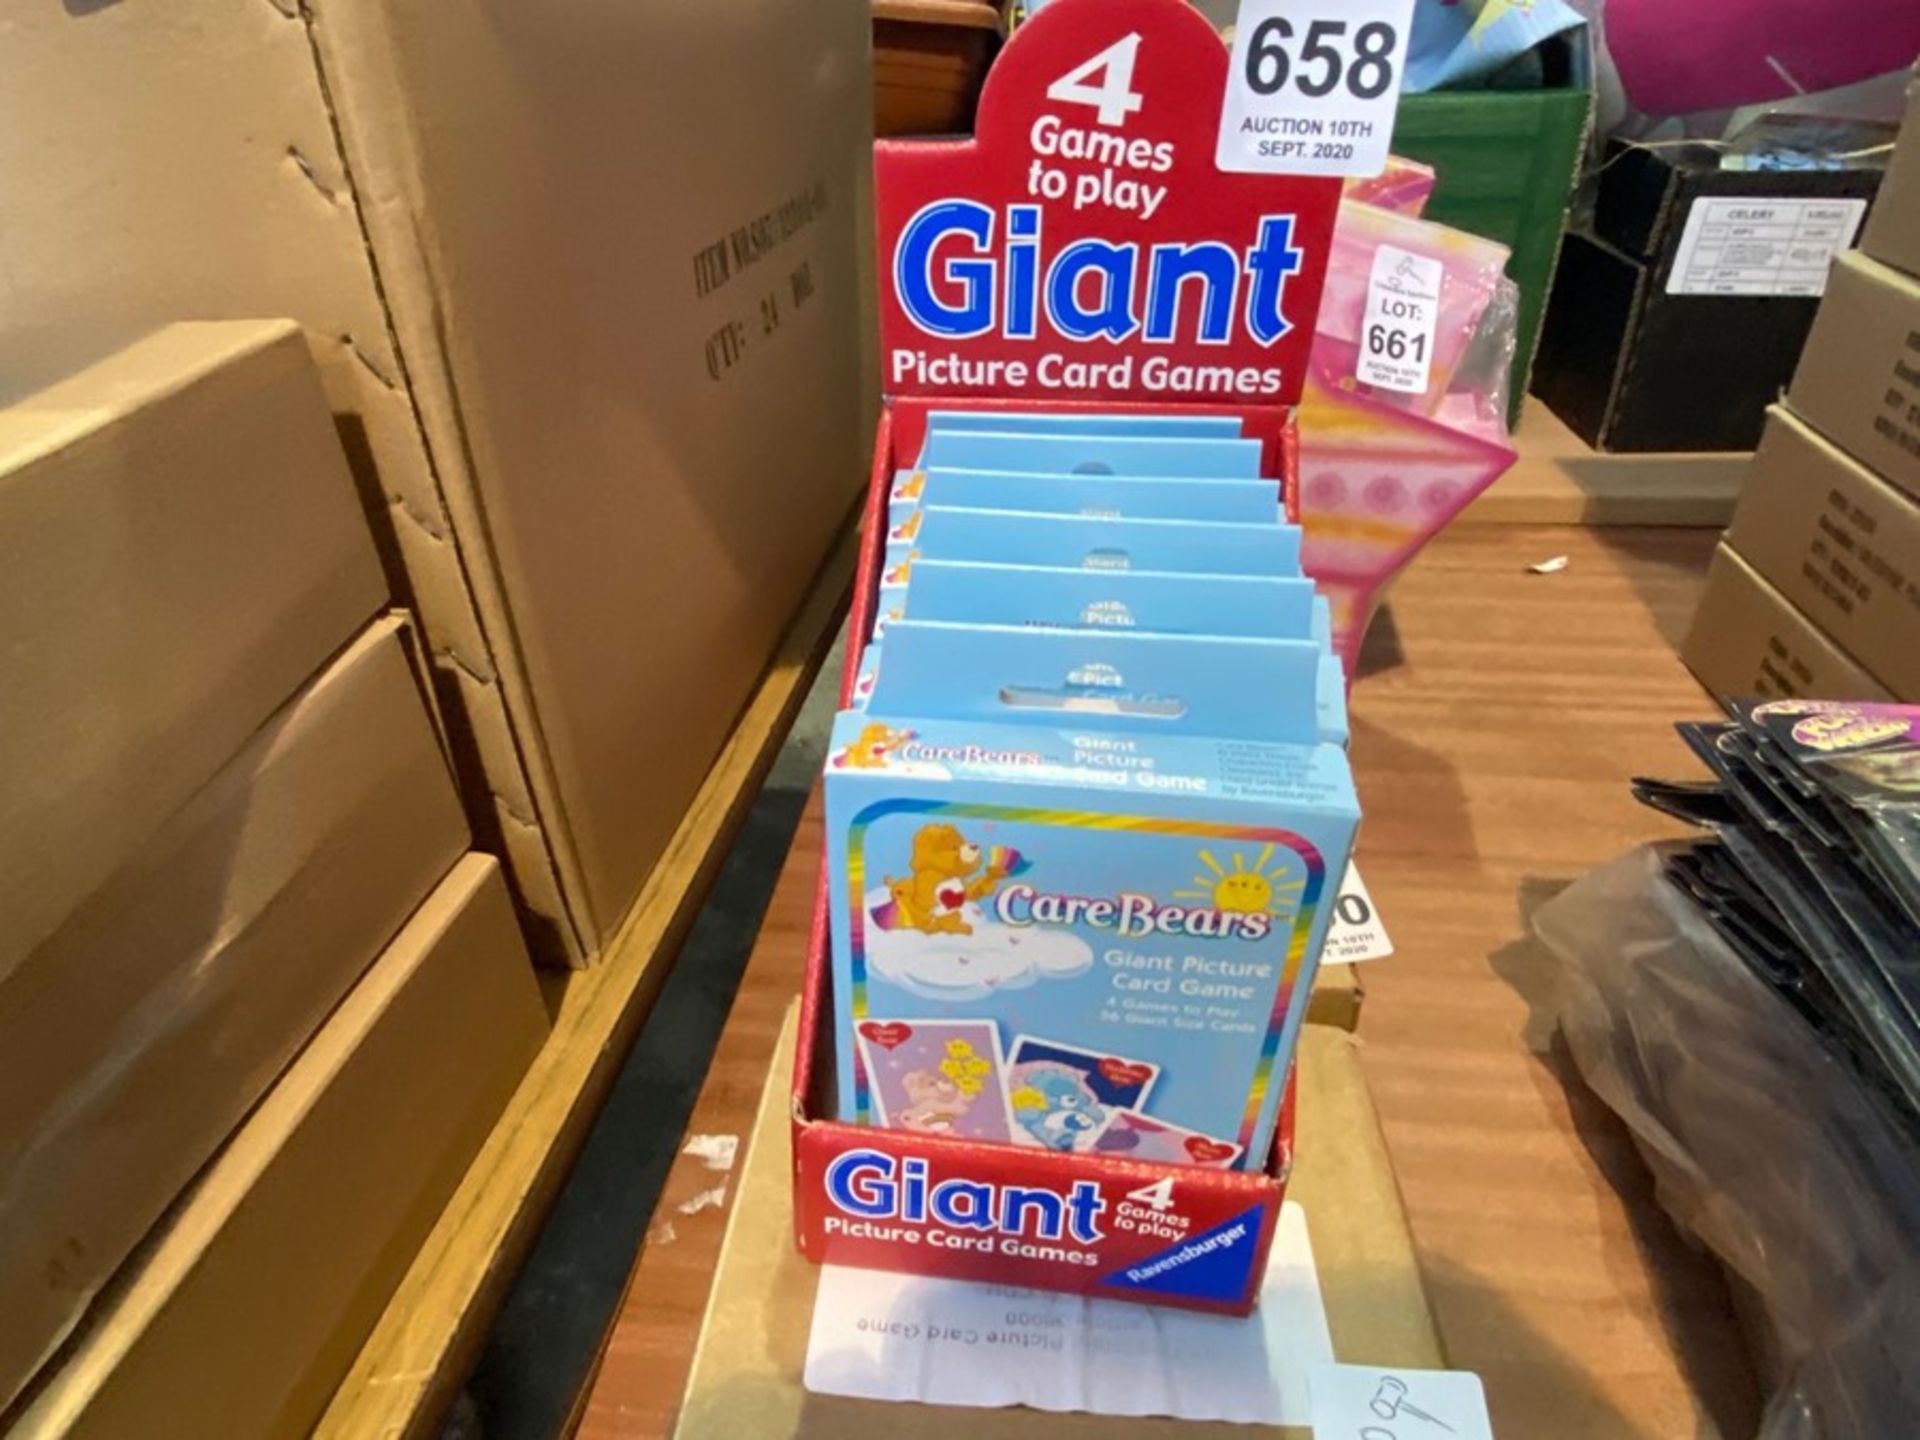 BOX OF GIANT PICTURE CARD GAMES